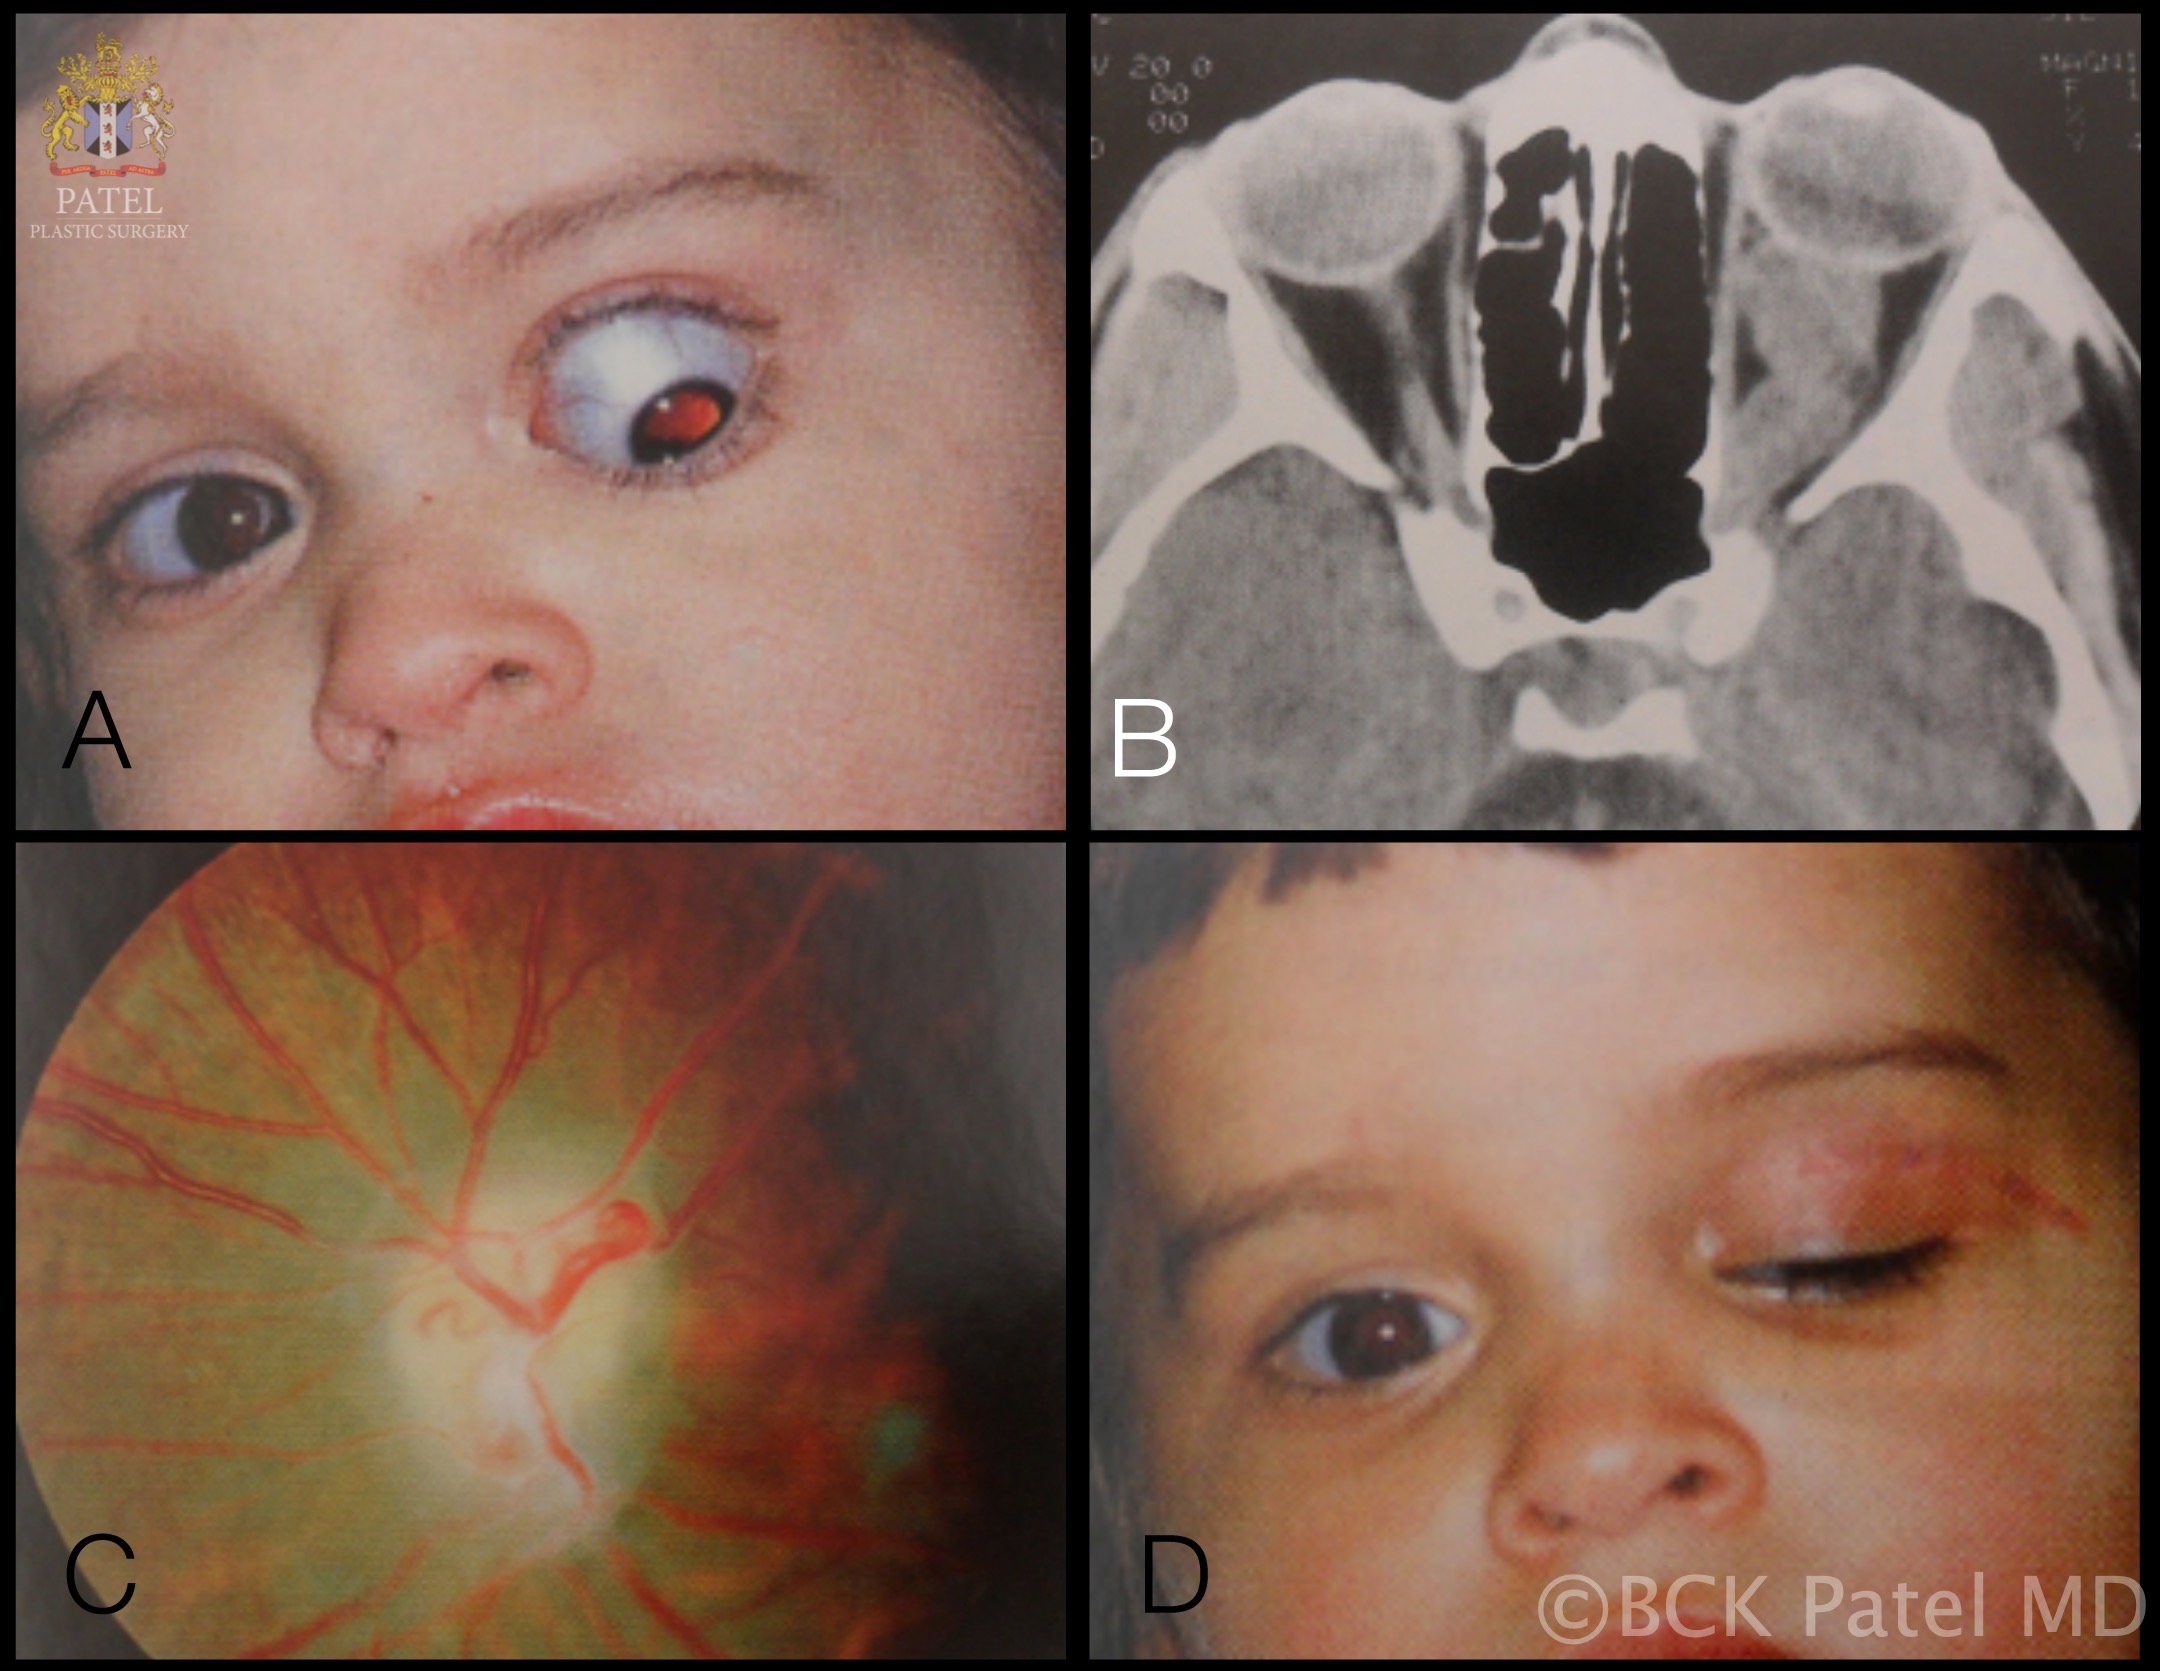 Optic nerve glioma. A: 16-month-old male with presents with marked proptosis, hypoglobus, hypotropia, afferent pupillary defect and optic atrophy. B: CT scan shows a large left optic nerve tumor with a midpoint kink that is often seen. Enlargement of the optic canal and enlargement of the sella turcica (Turk's saddle). C: Optic atrophy D: One month after combined neurosurgical and orbital surgery to remove the tumor with preservation of the globe.